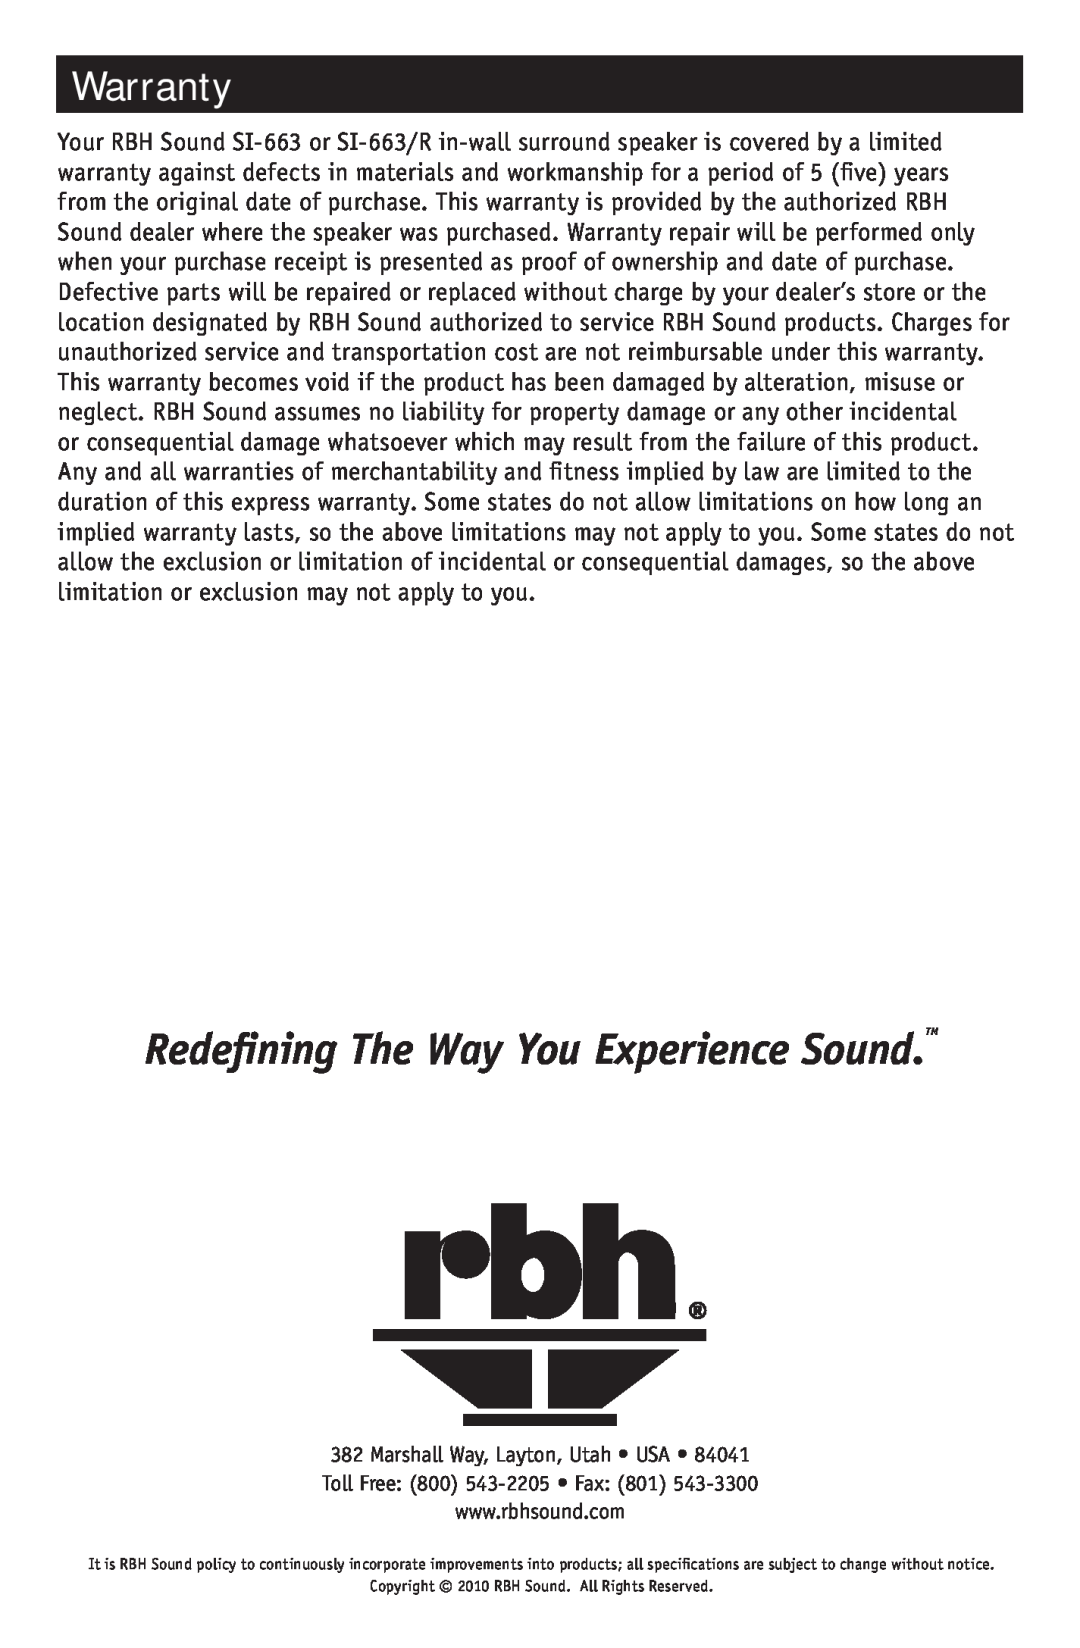 RBH Sound SI-663 owner manual Warranty, Redefining The Way You Experience Sound.TM 